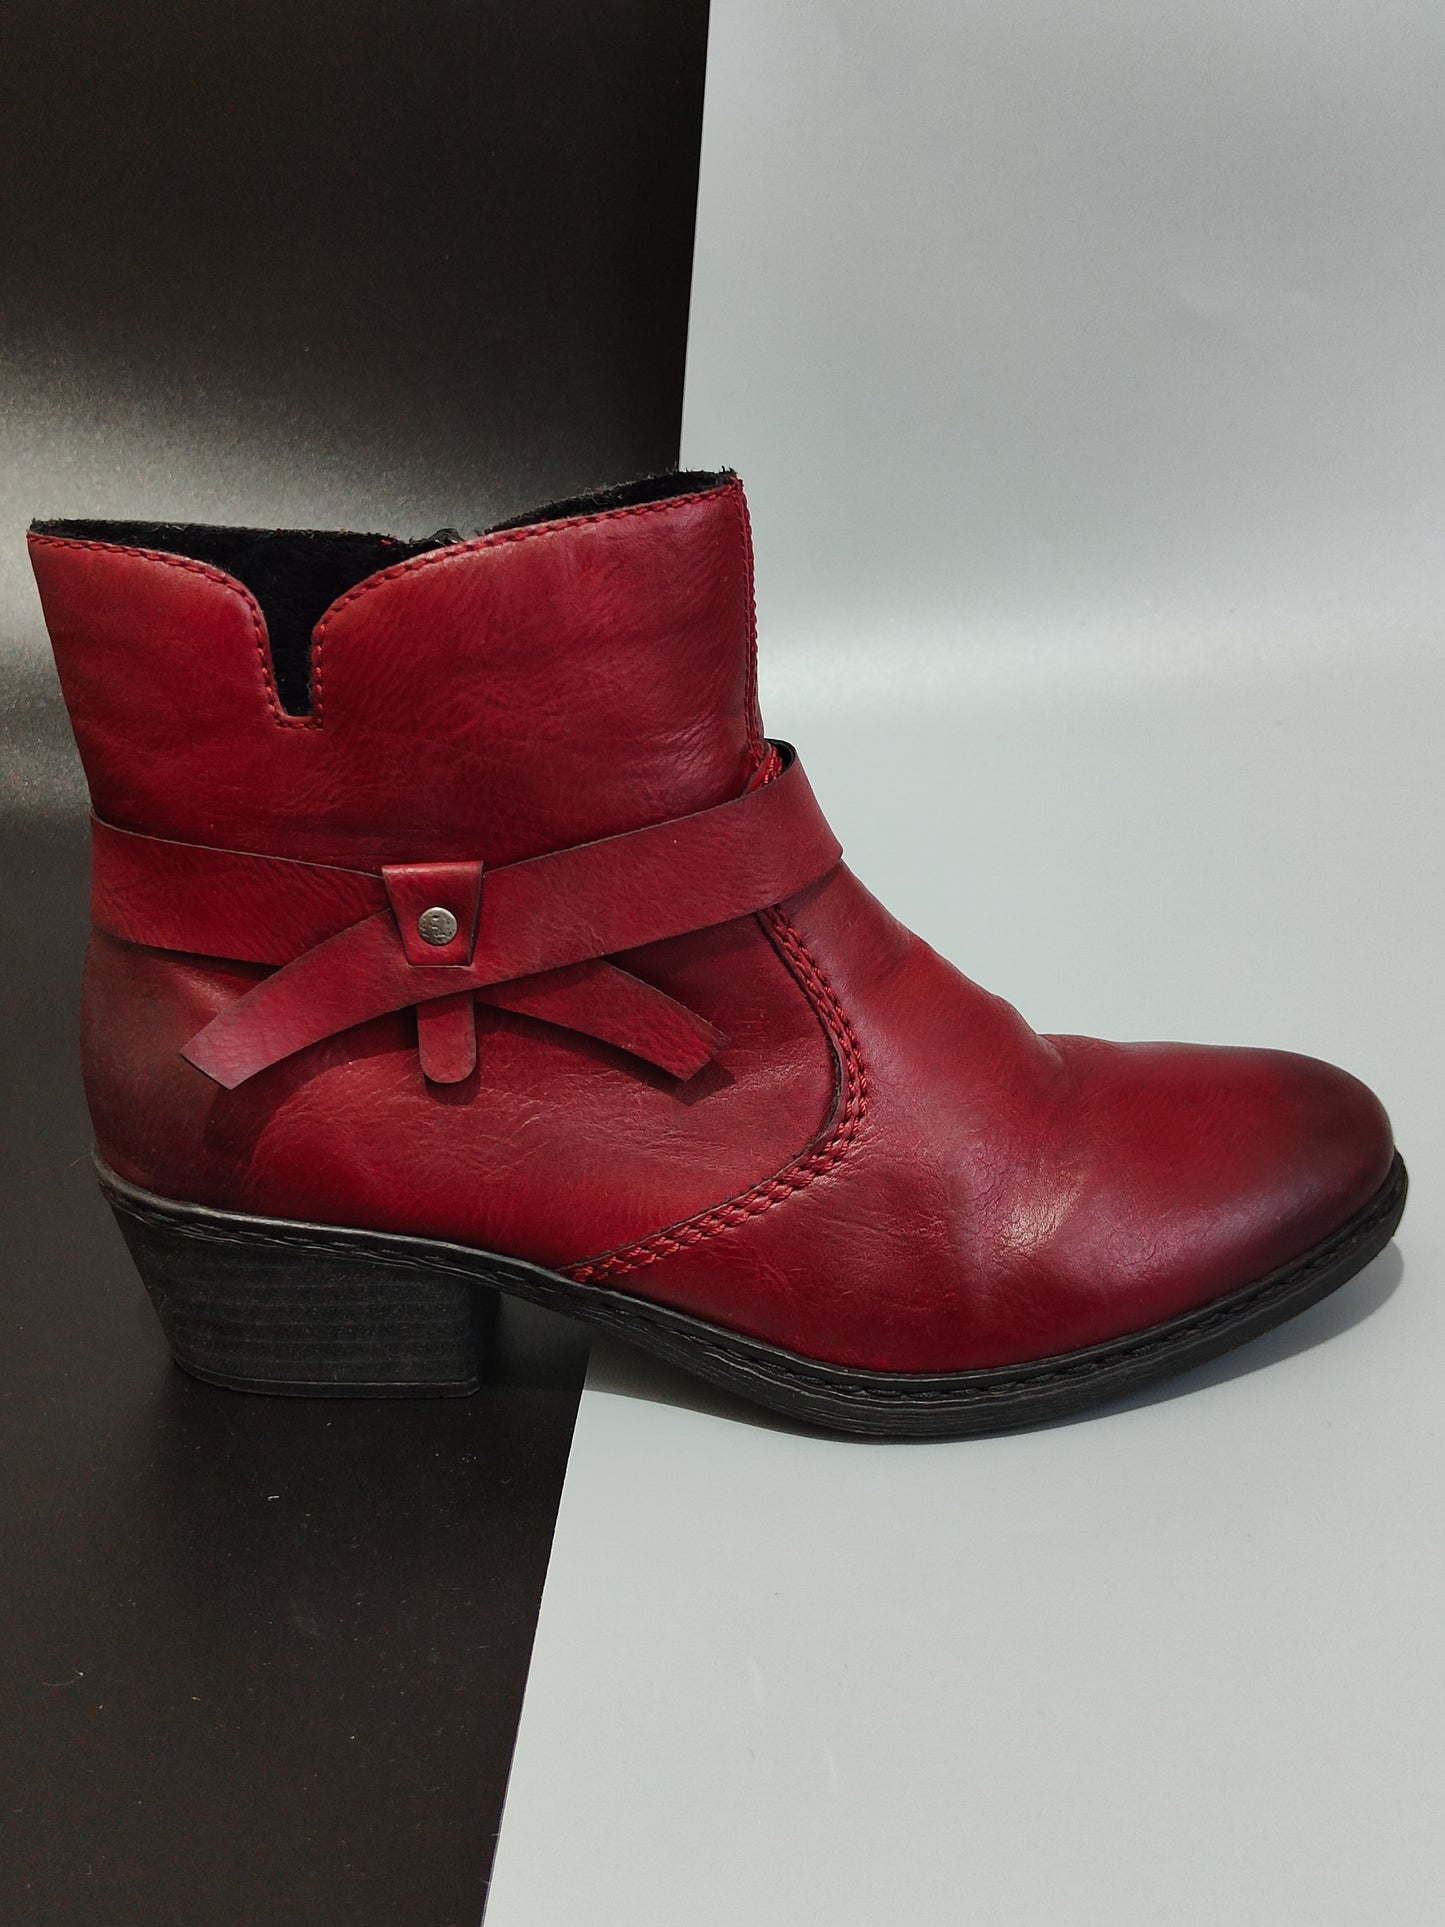 Antistress Women's Ankle Boots Red leather UK 5 / EU 38